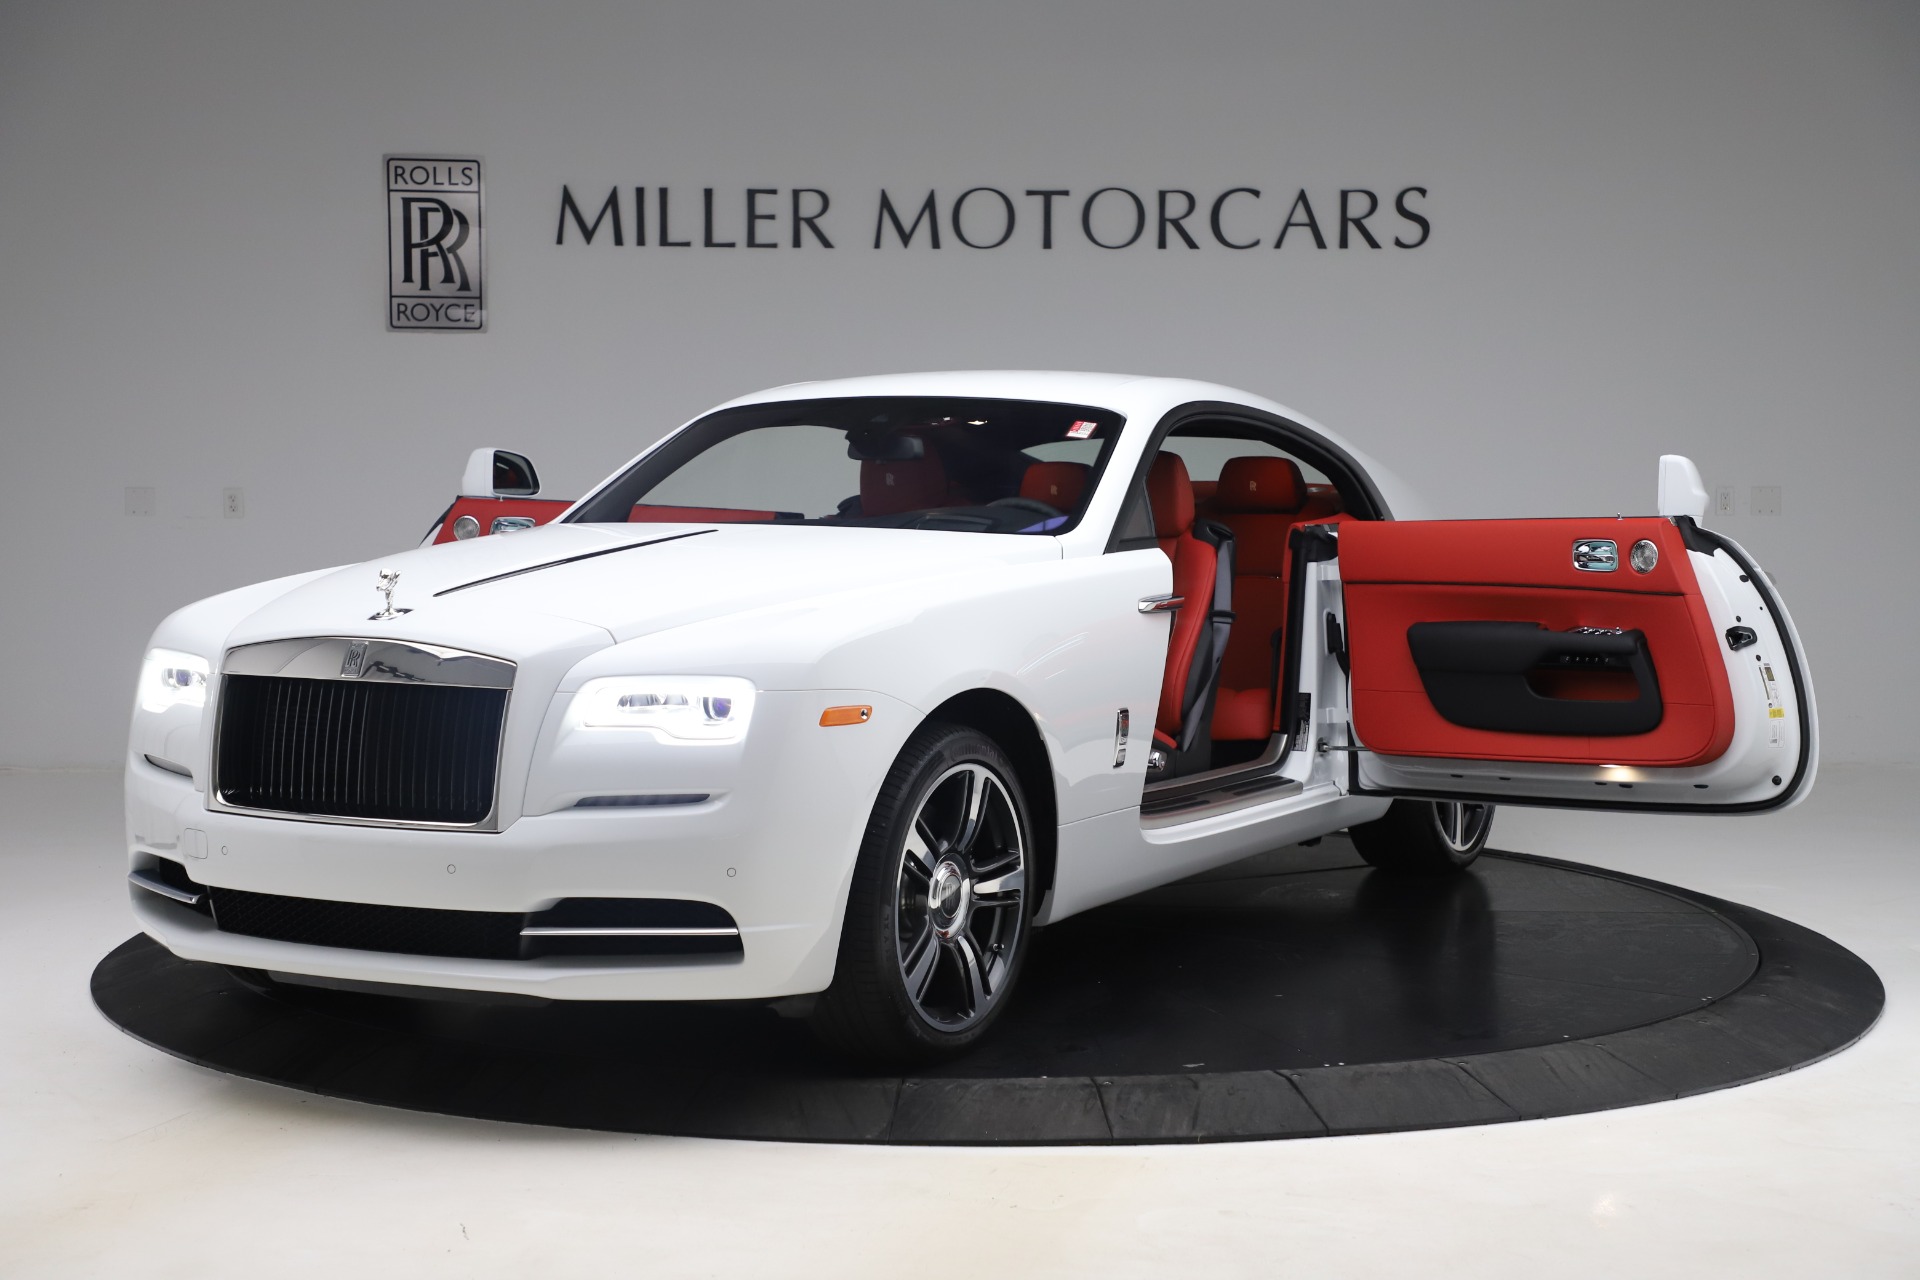 New 2020 RollsRoyce Wraith For Sale (Special Pricing) RollsRoyce Motor Cars Greenwich Stock